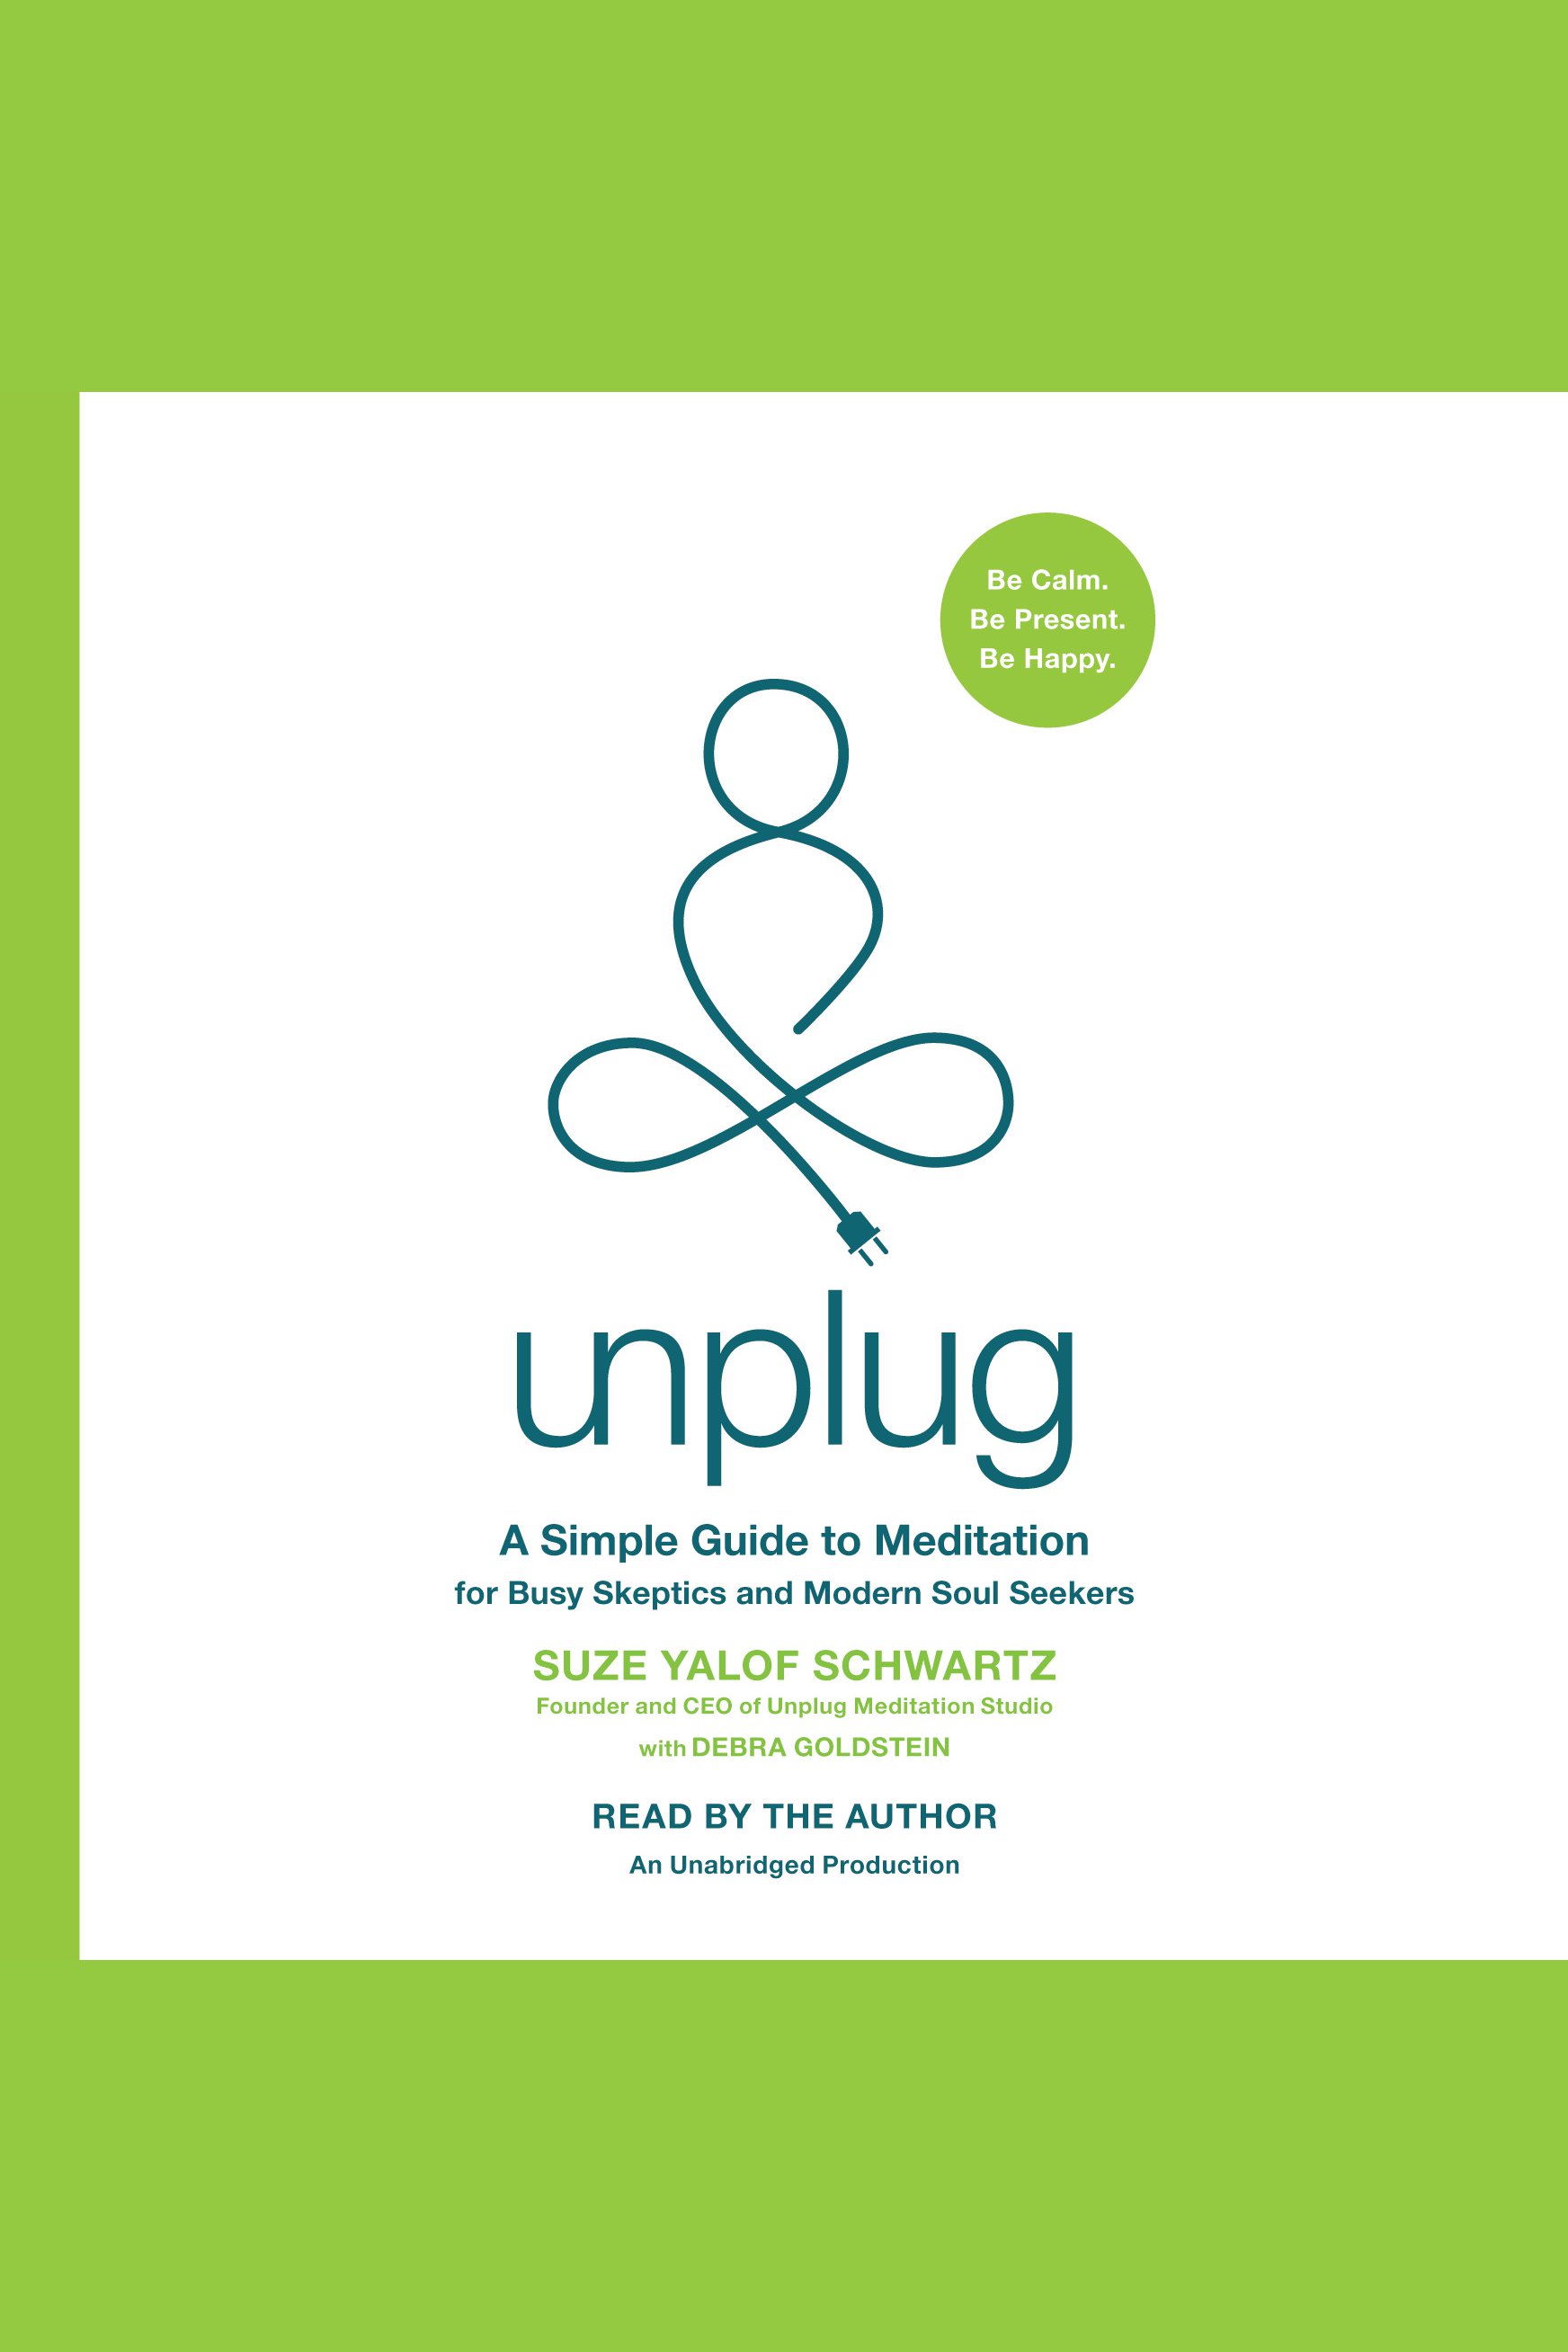 Imagen de portada para Unplug [electronic resource] : A Simple Guide to Meditation for Busy Skeptics and Modern Soul Seekers